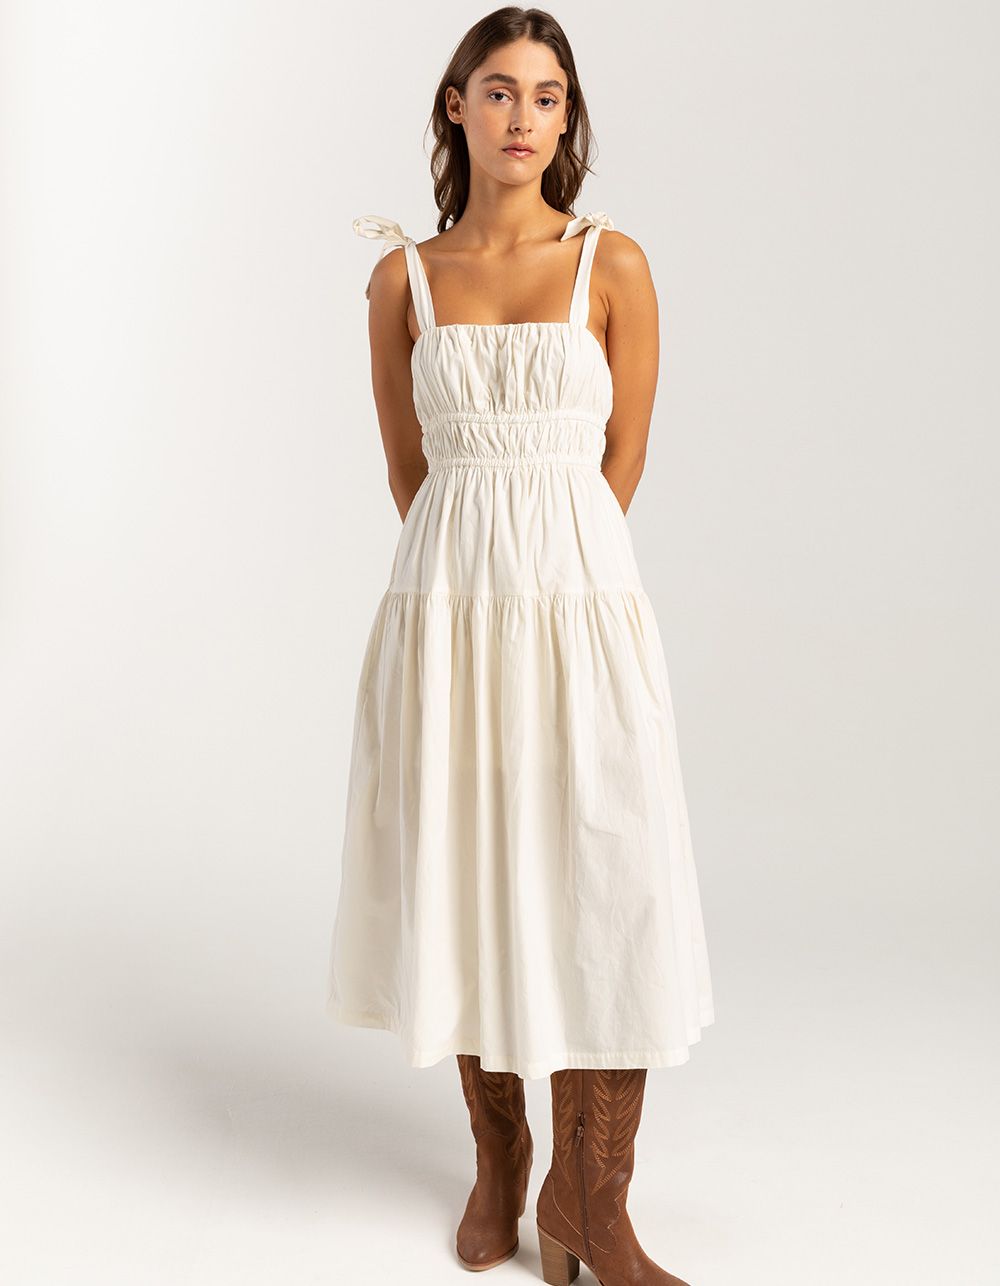 WEST OF MELROSE Tiered Womens Midi Dress | Tillys